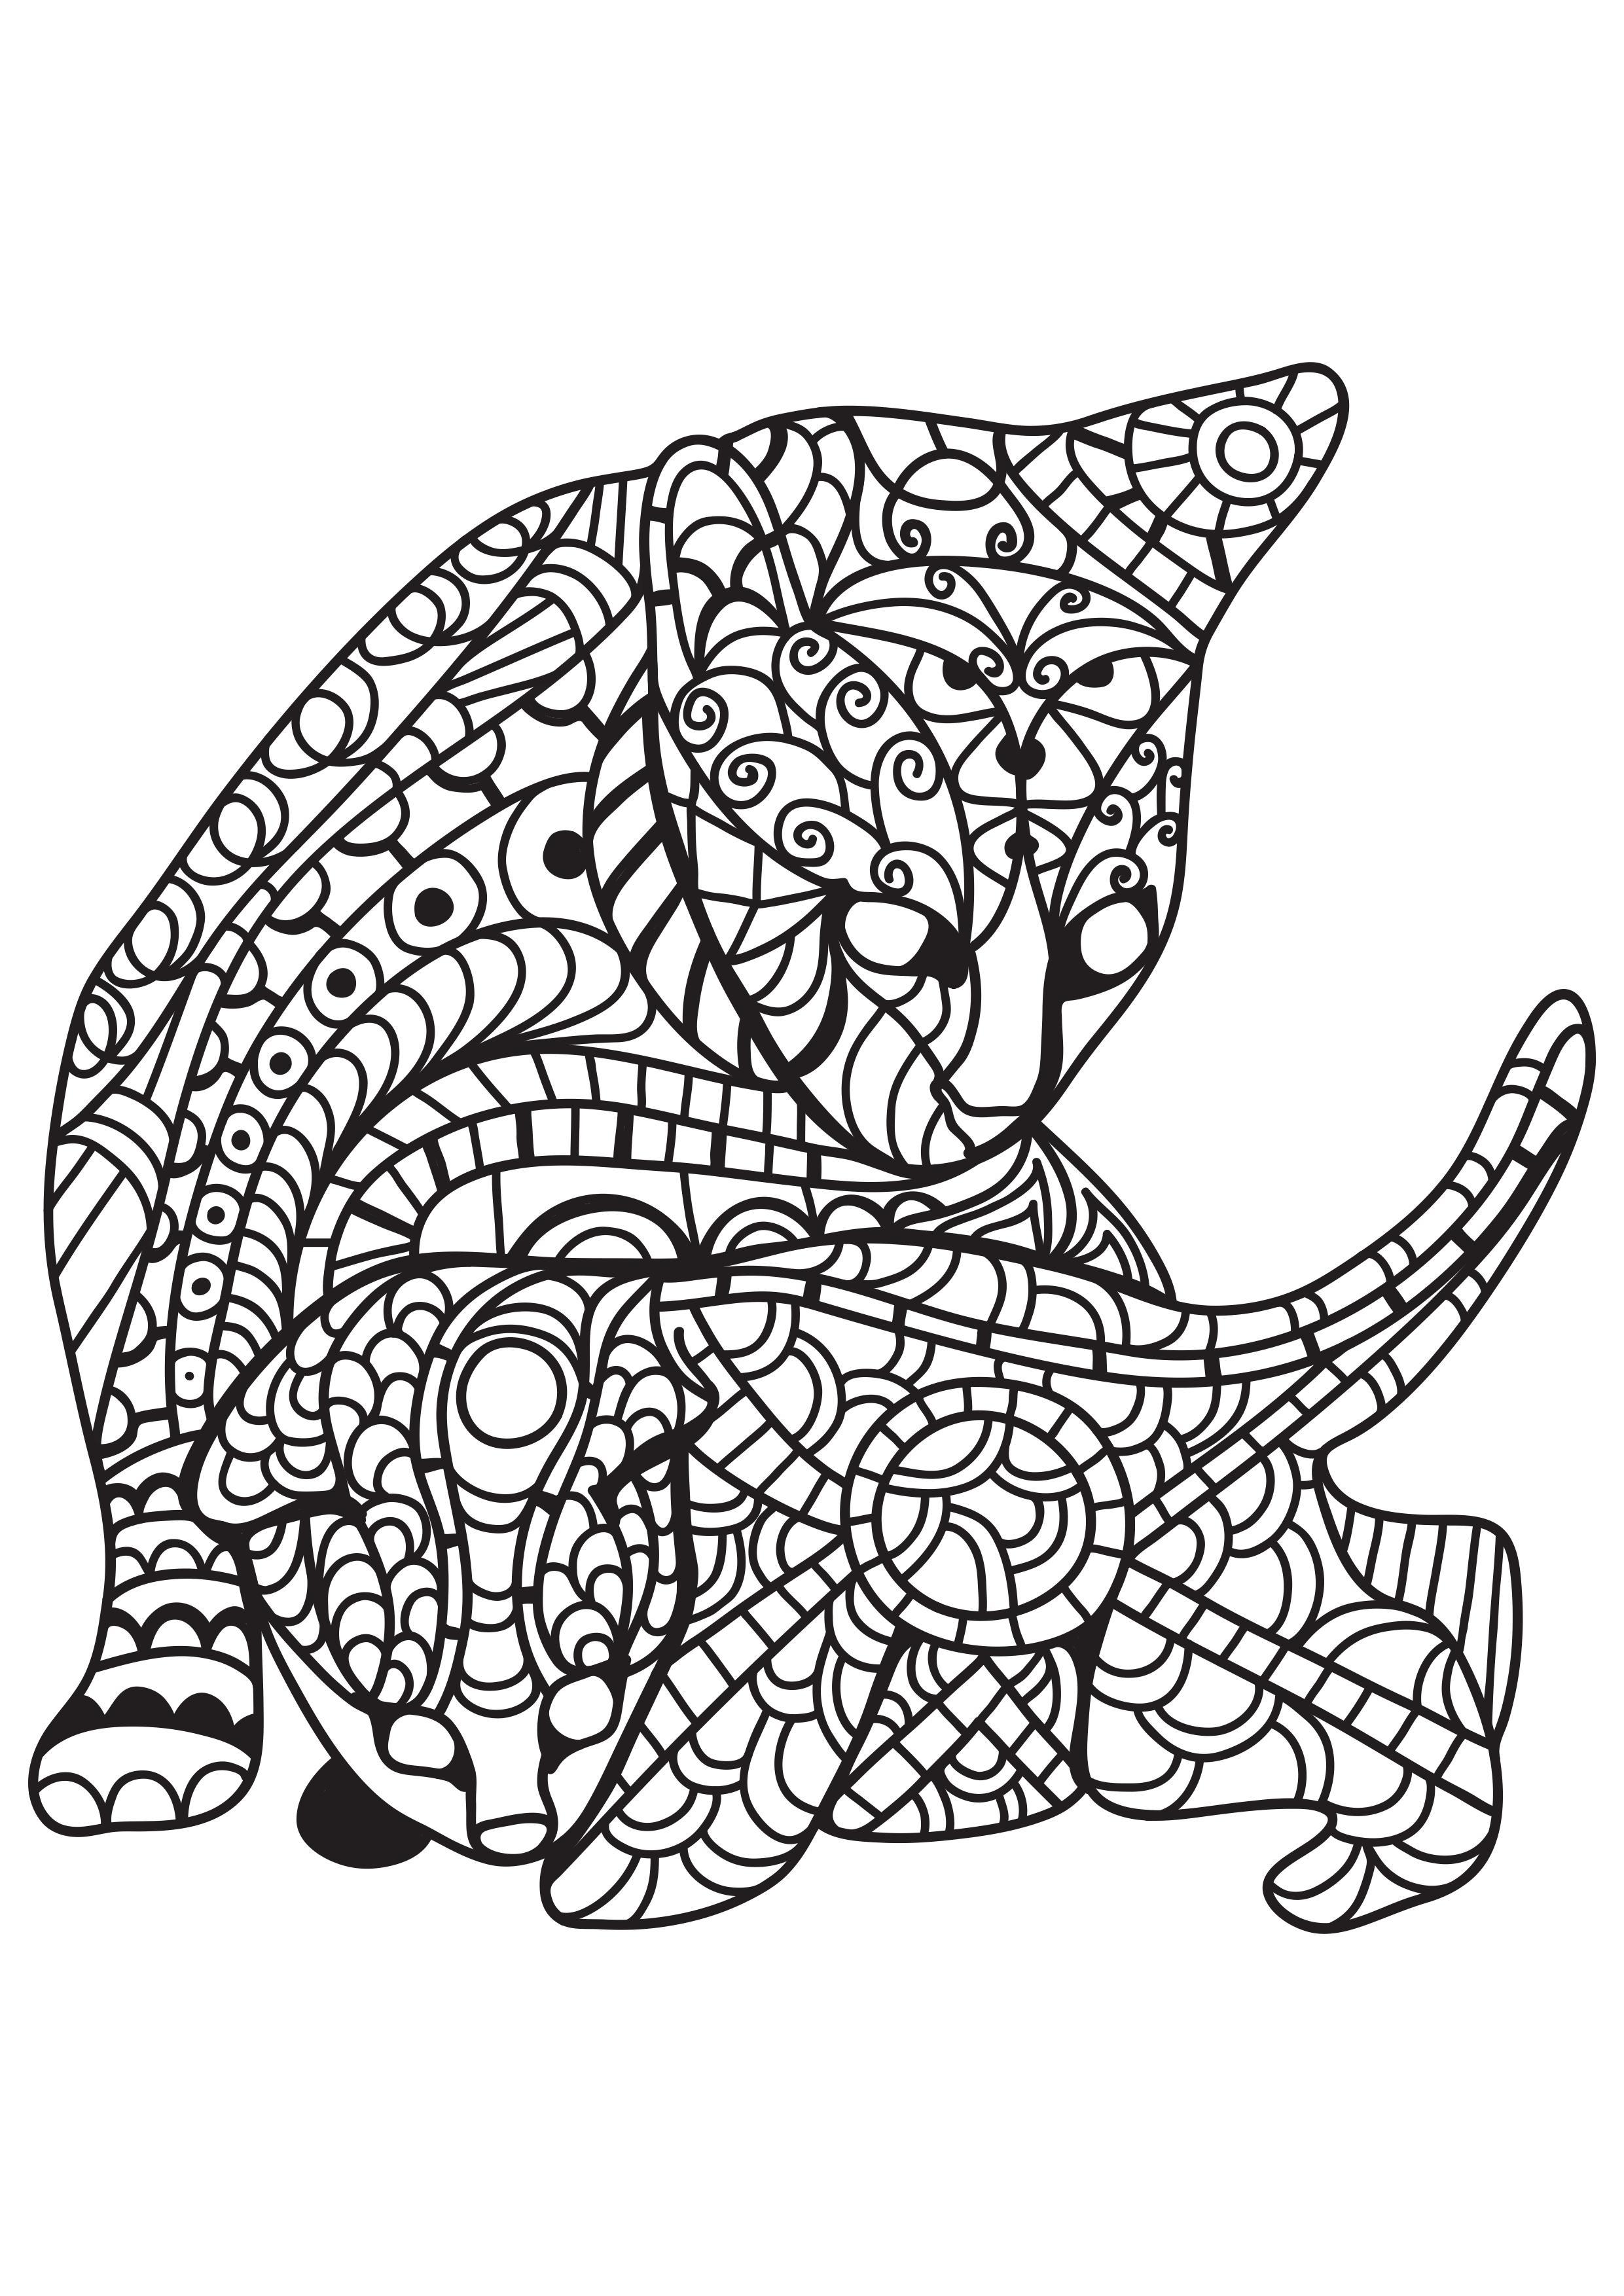 Coloring Page cat with kitten   free printable coloring pages ...